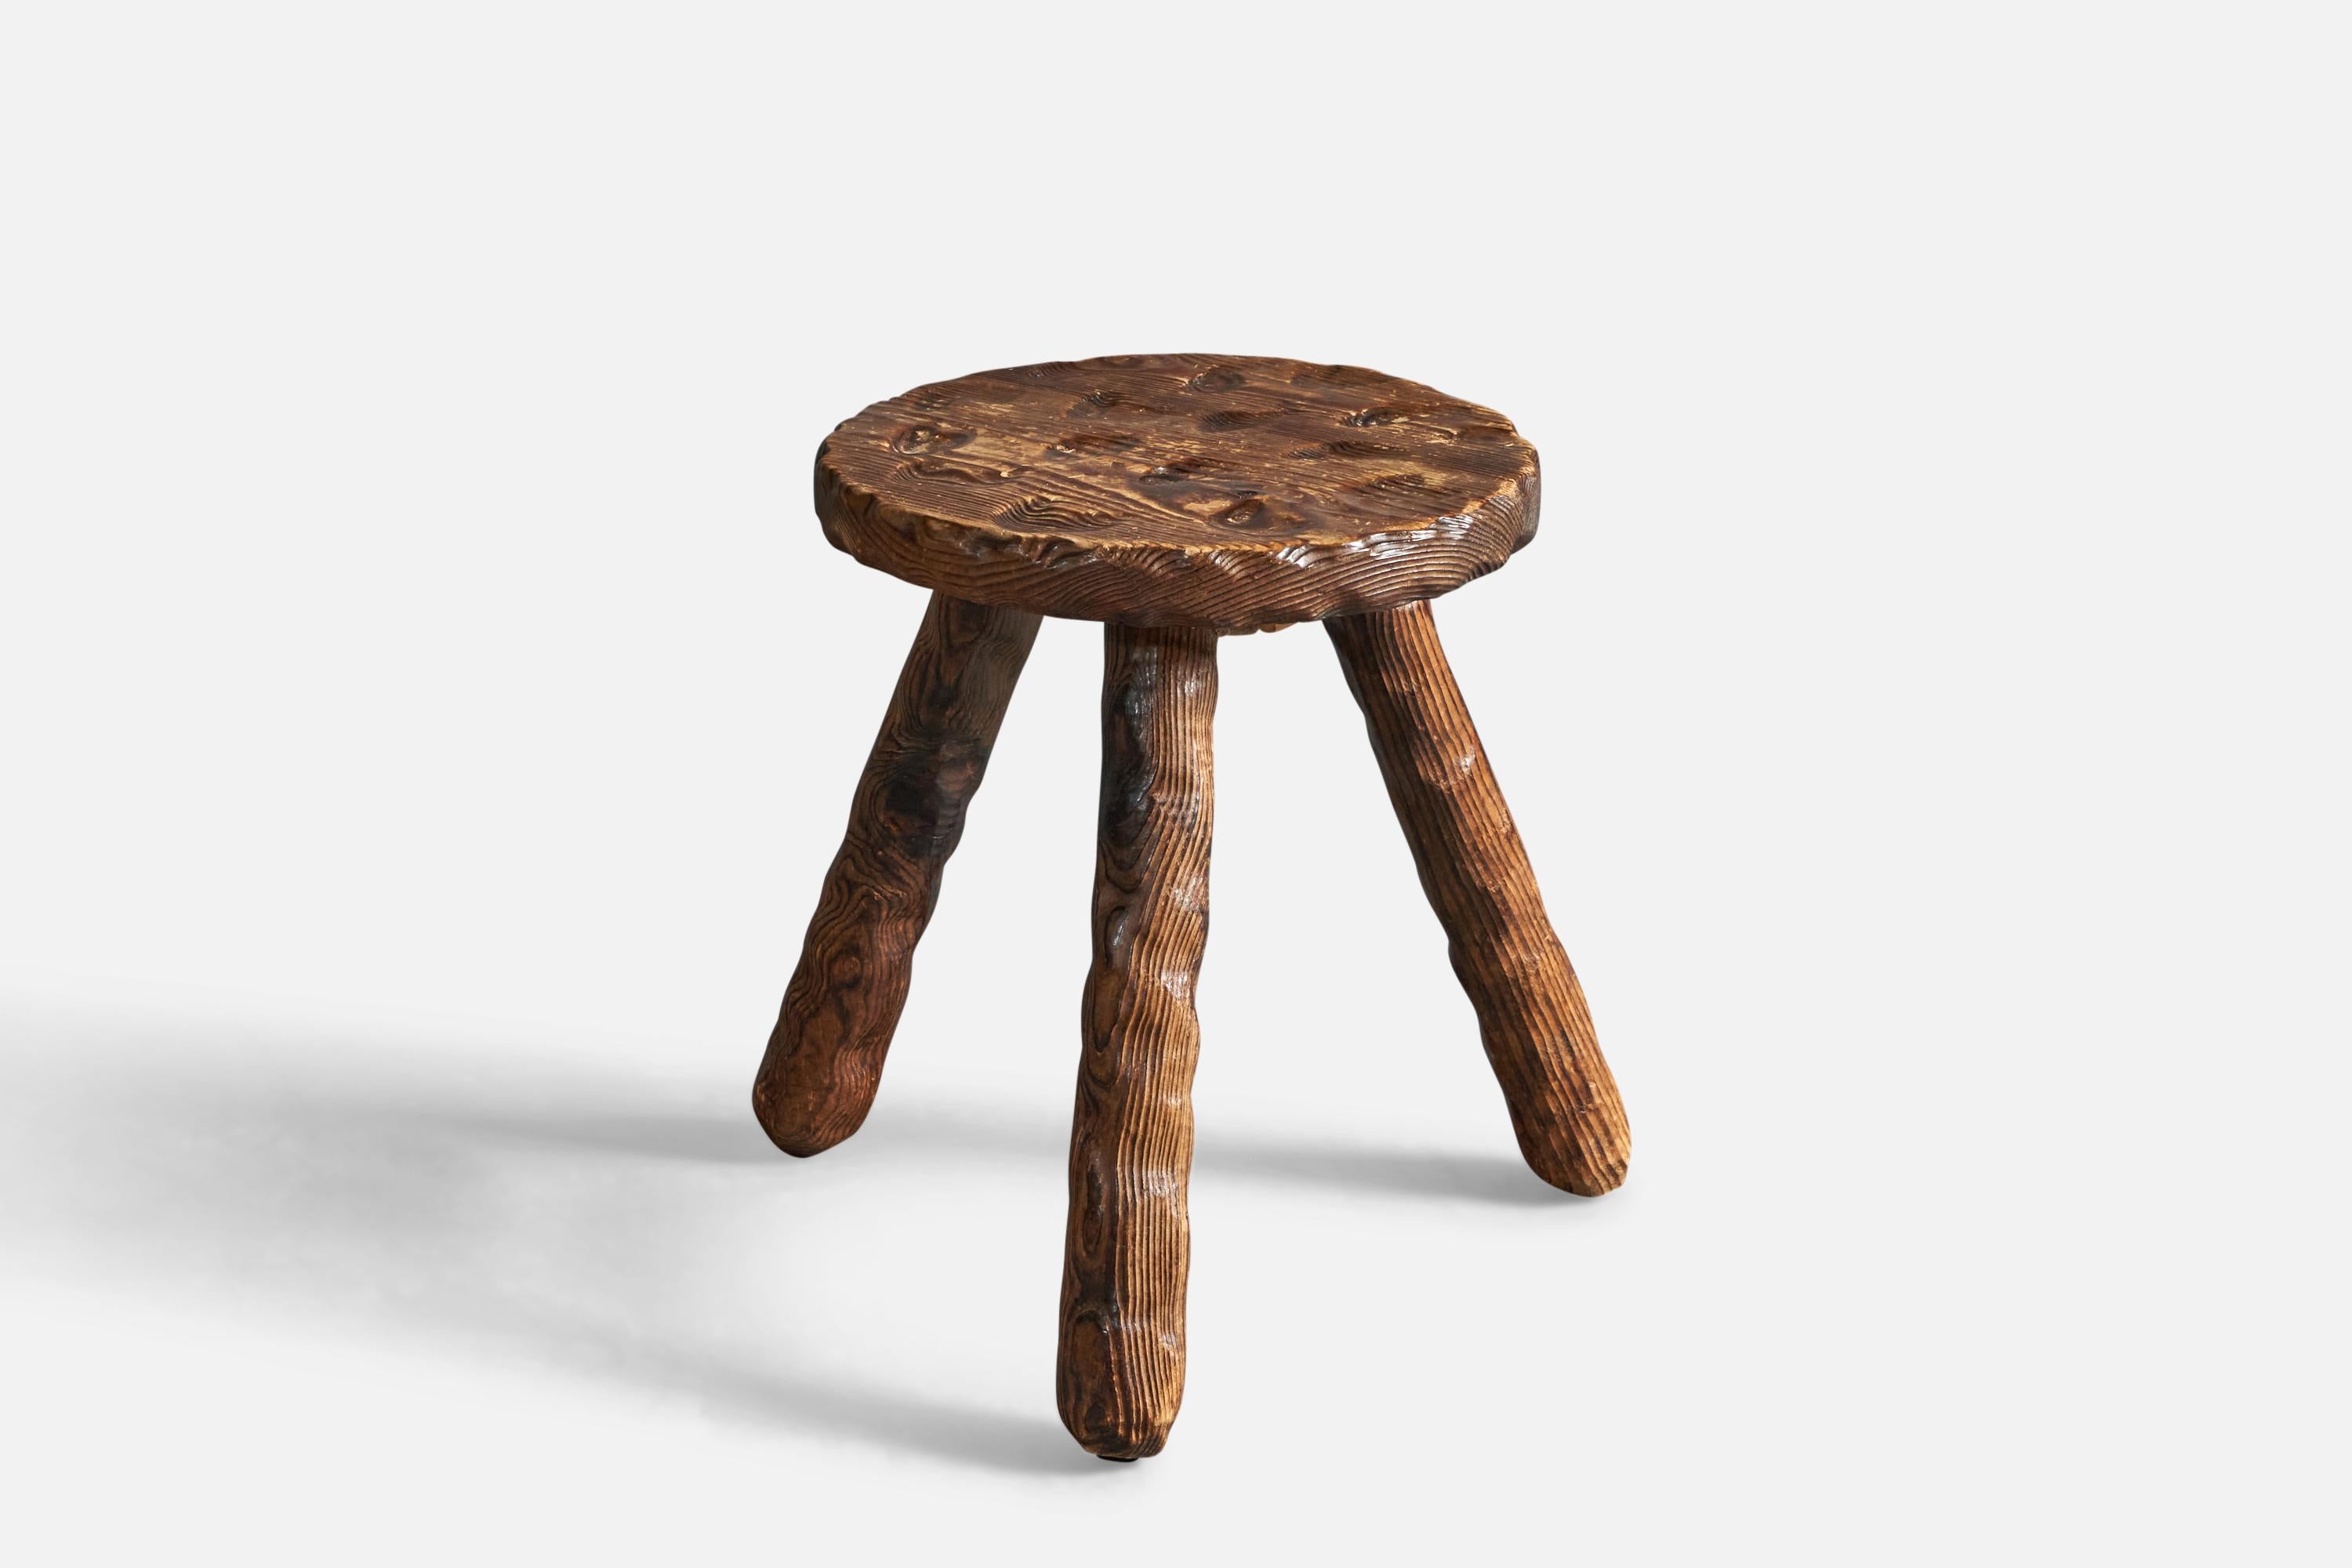 A hand-carved and stained pine stool, designed and produced in Sweden, c. 1970s